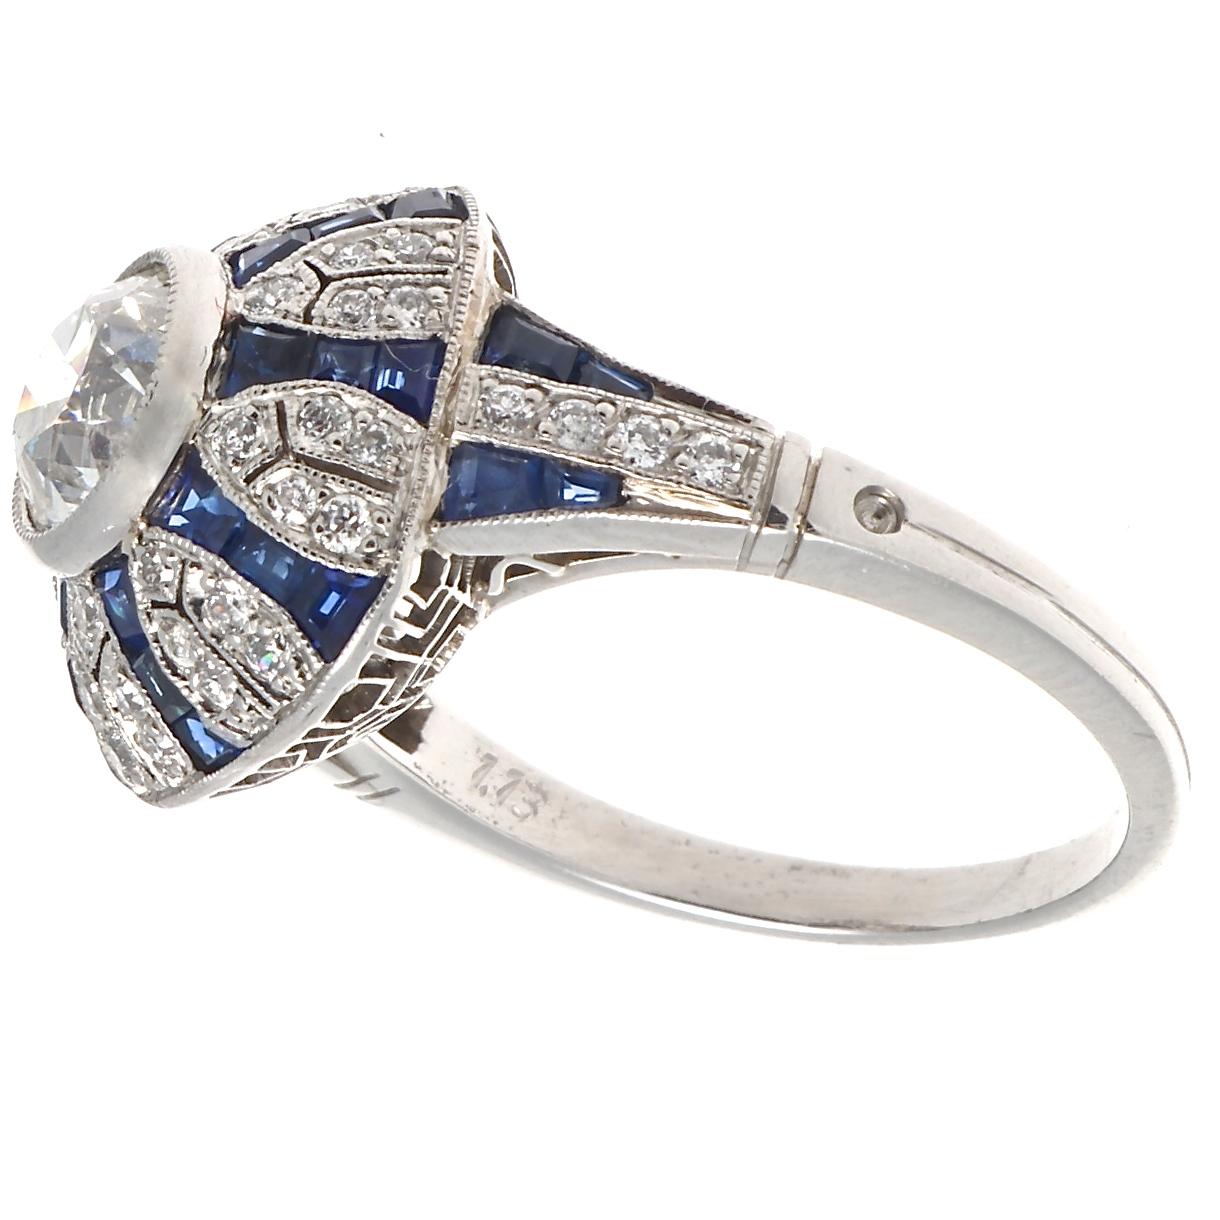 Stunning Art Deco inspired ring featuring a 1.13 carat old European cut diamond, G-H color, VS clarity. There are 48 accenting old European cut diamonds that weigh  approximately 0.48 carats and are H-I color, VS-SI clarity. Also included in this